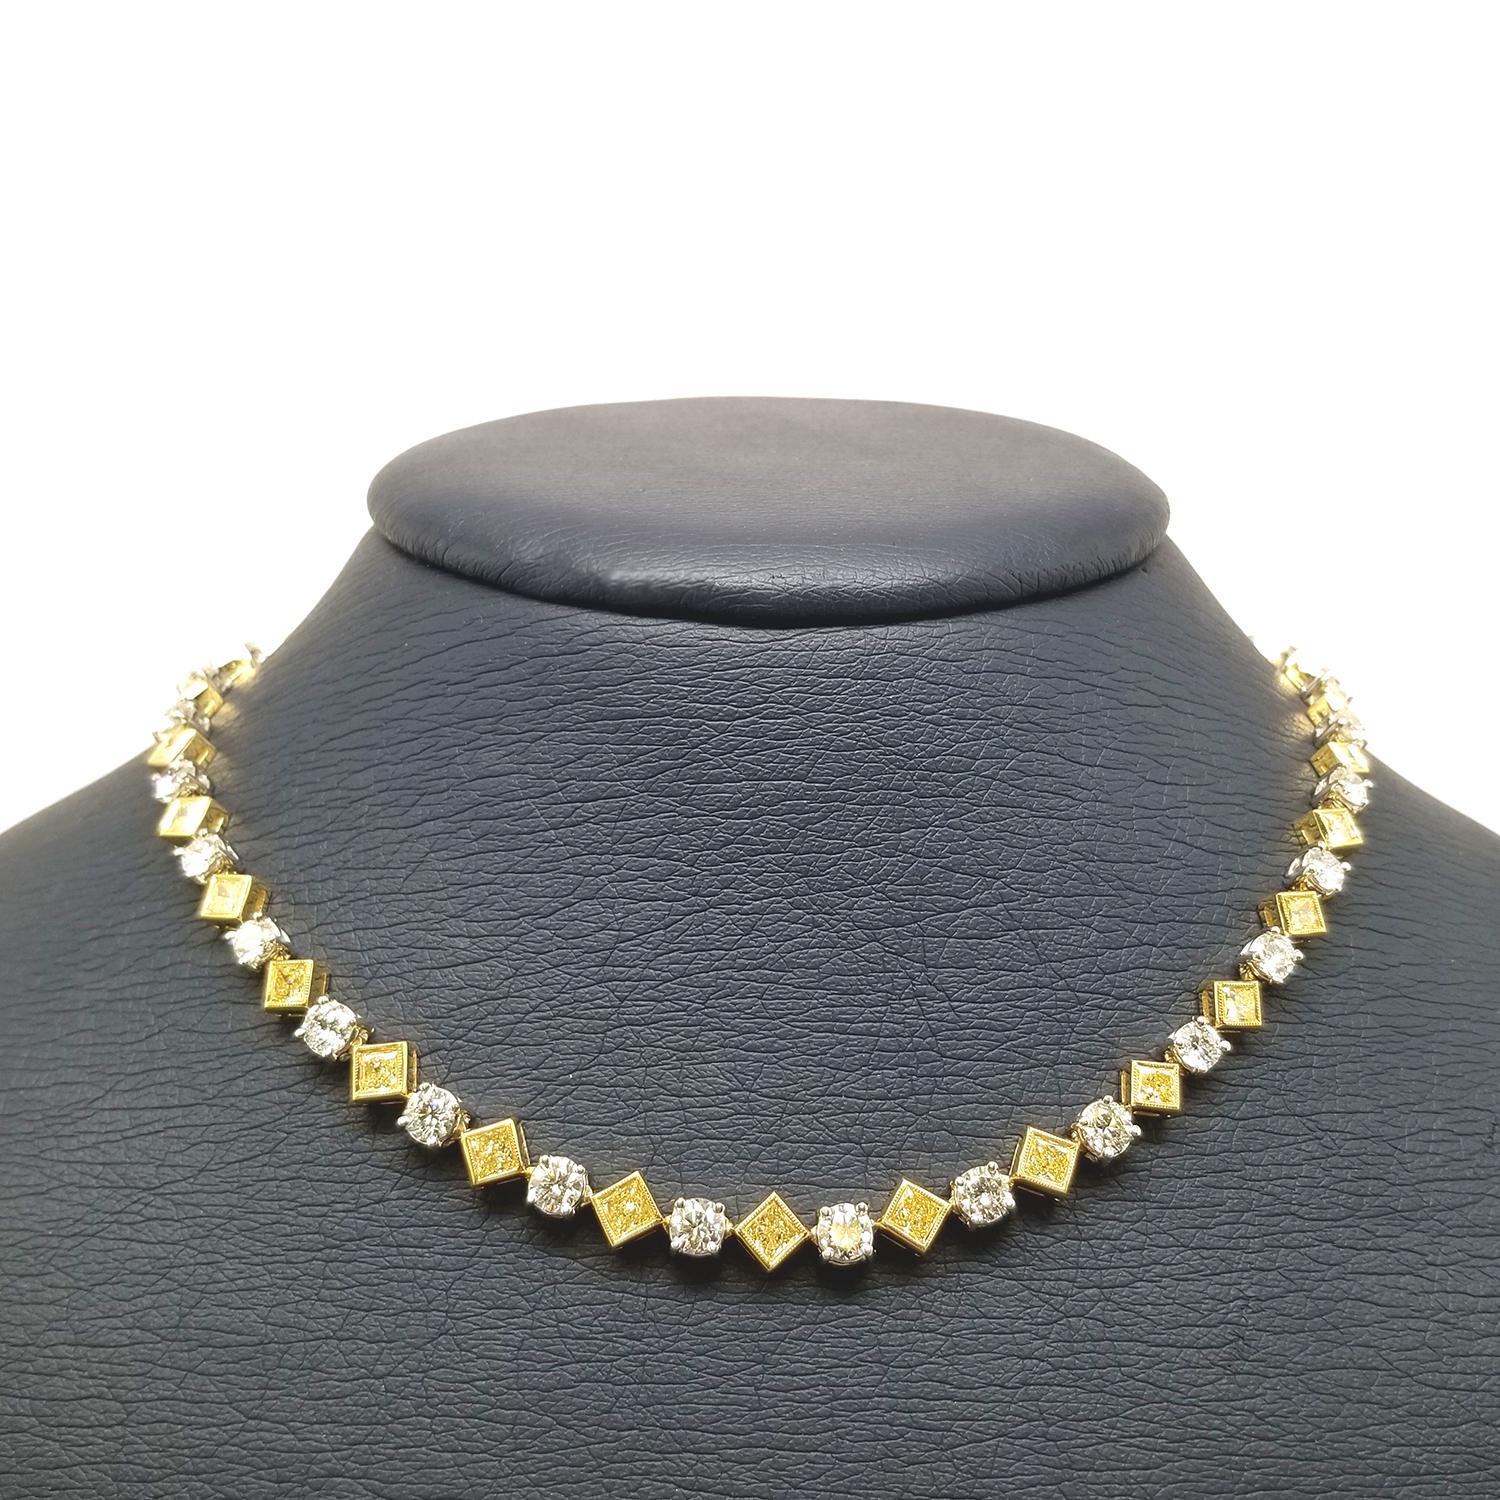 Fancy Yellow Princess Cut and Round Brilliant Diamonds set in a platinum and 18k yellow gold necklace
13.91 carats total weight 
